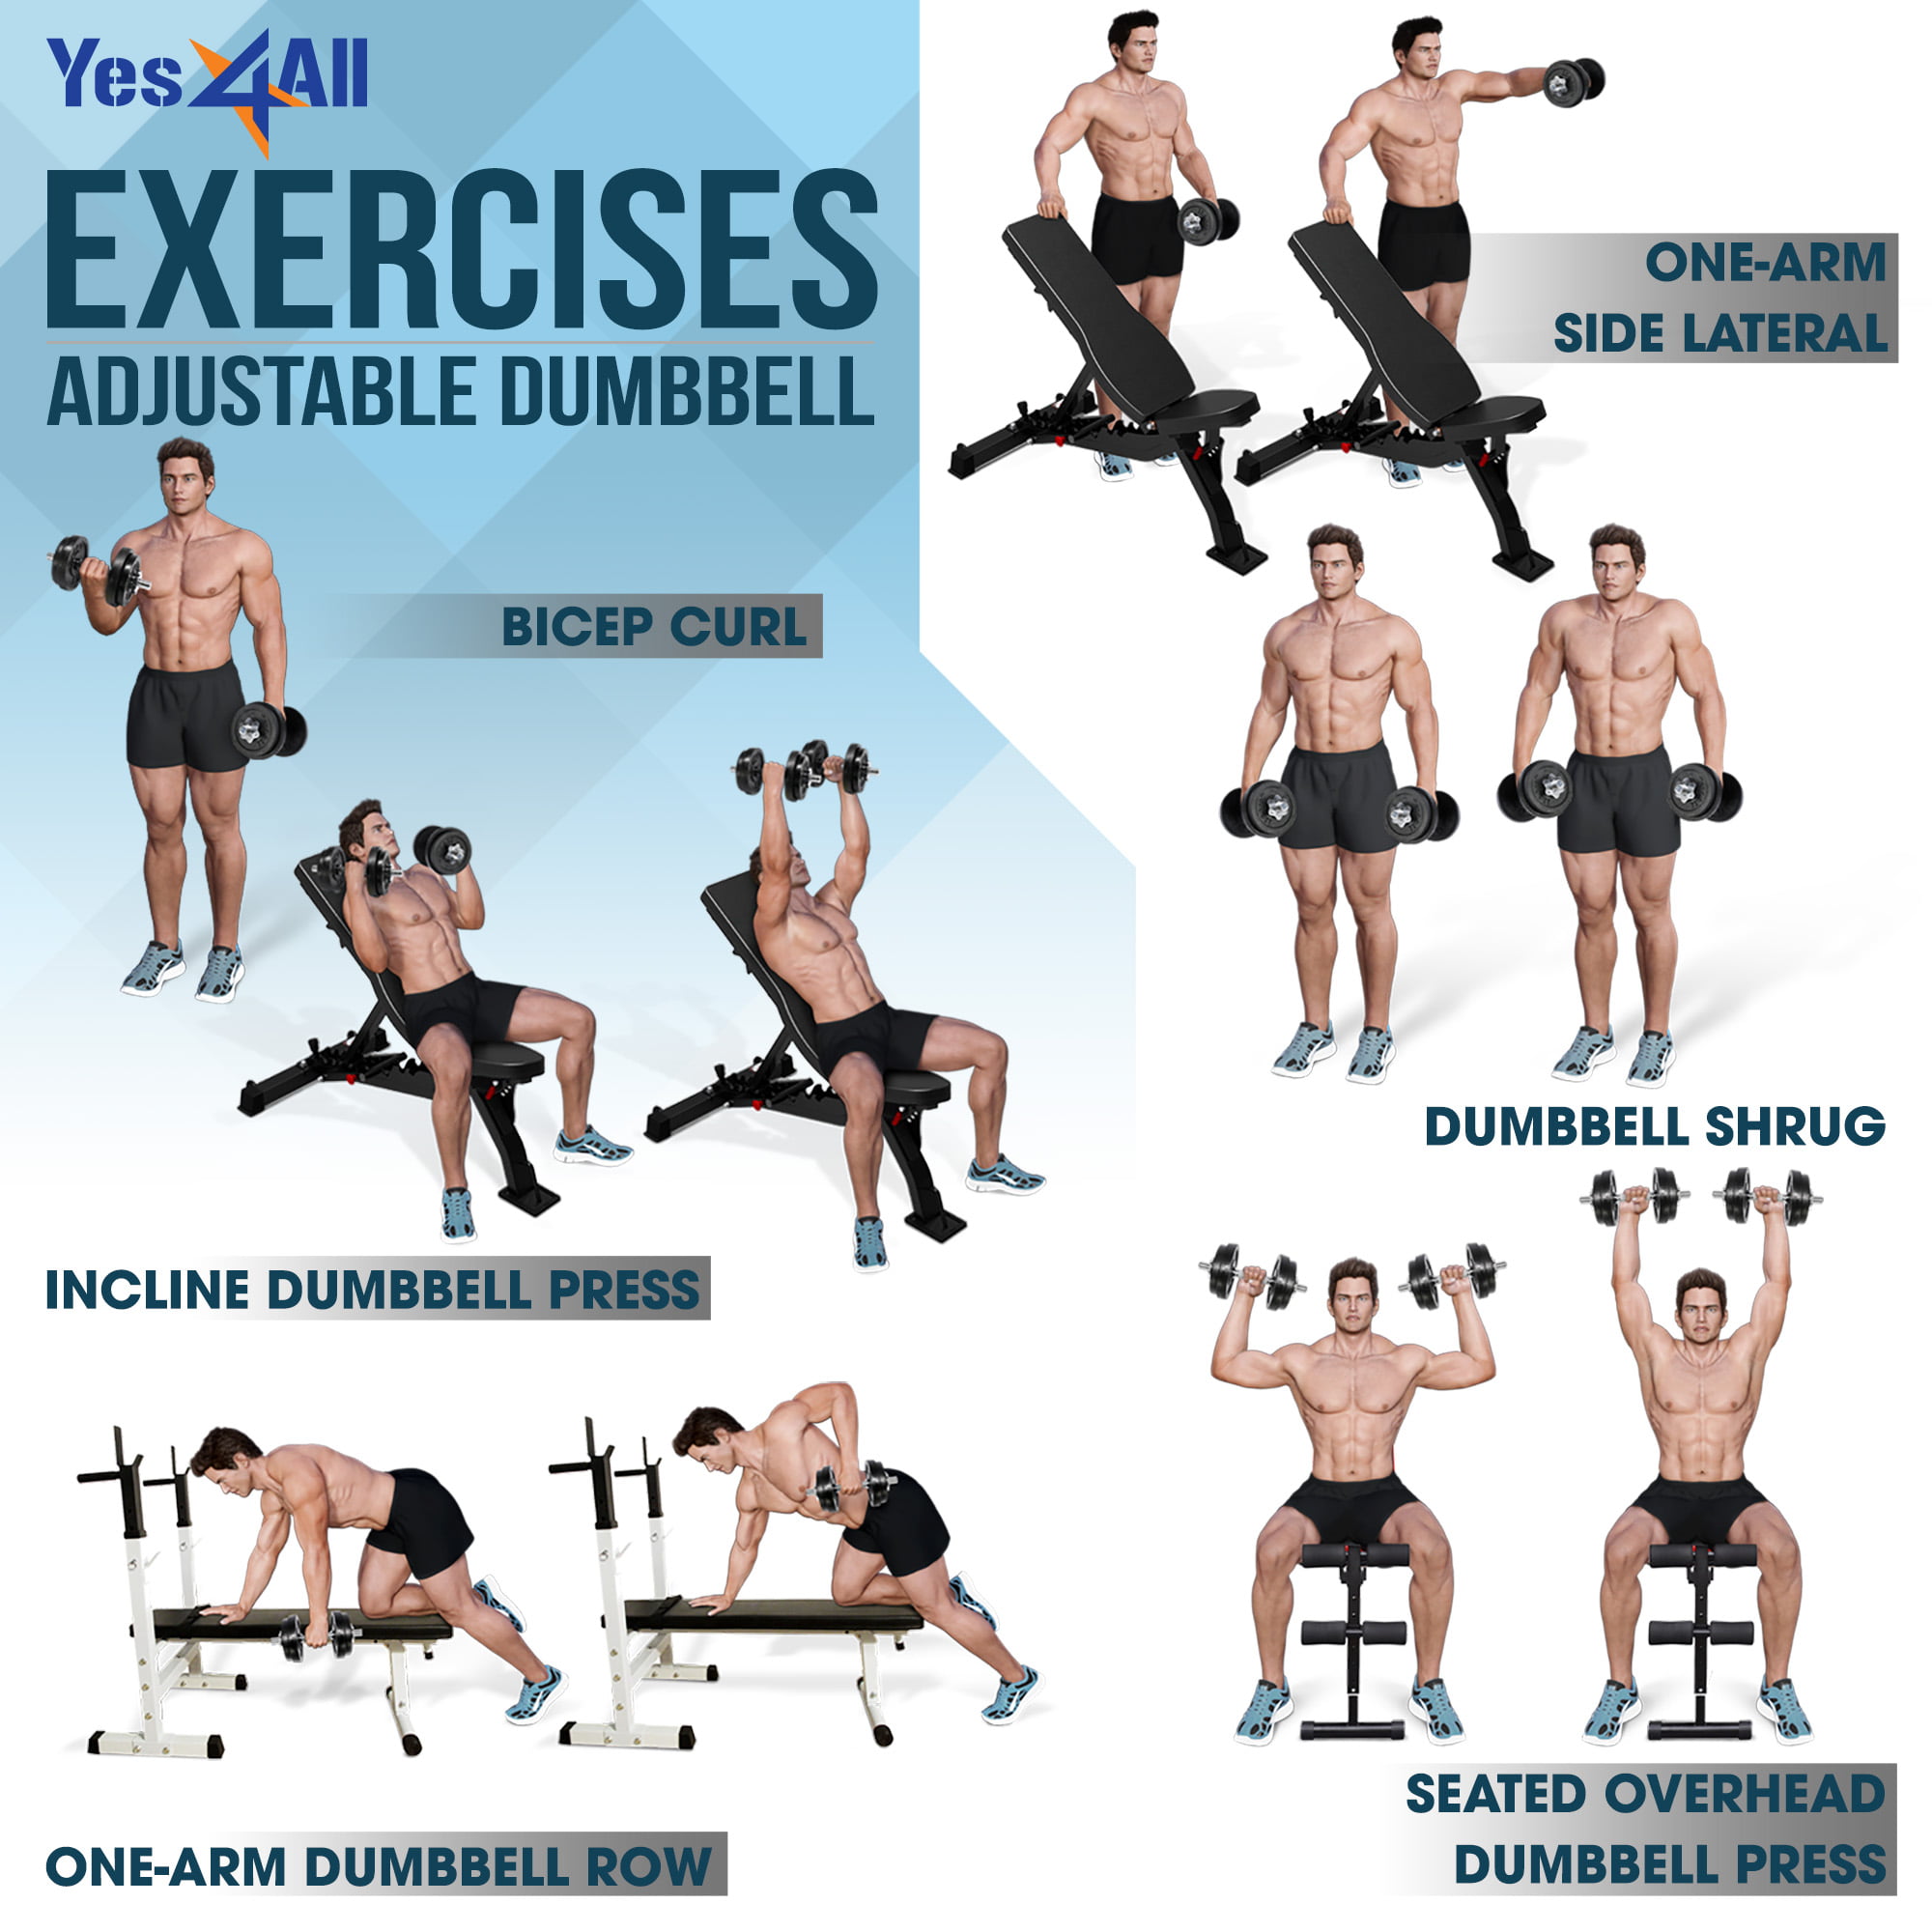 Dumbbell Exercises Home - dumbbell exercise at home